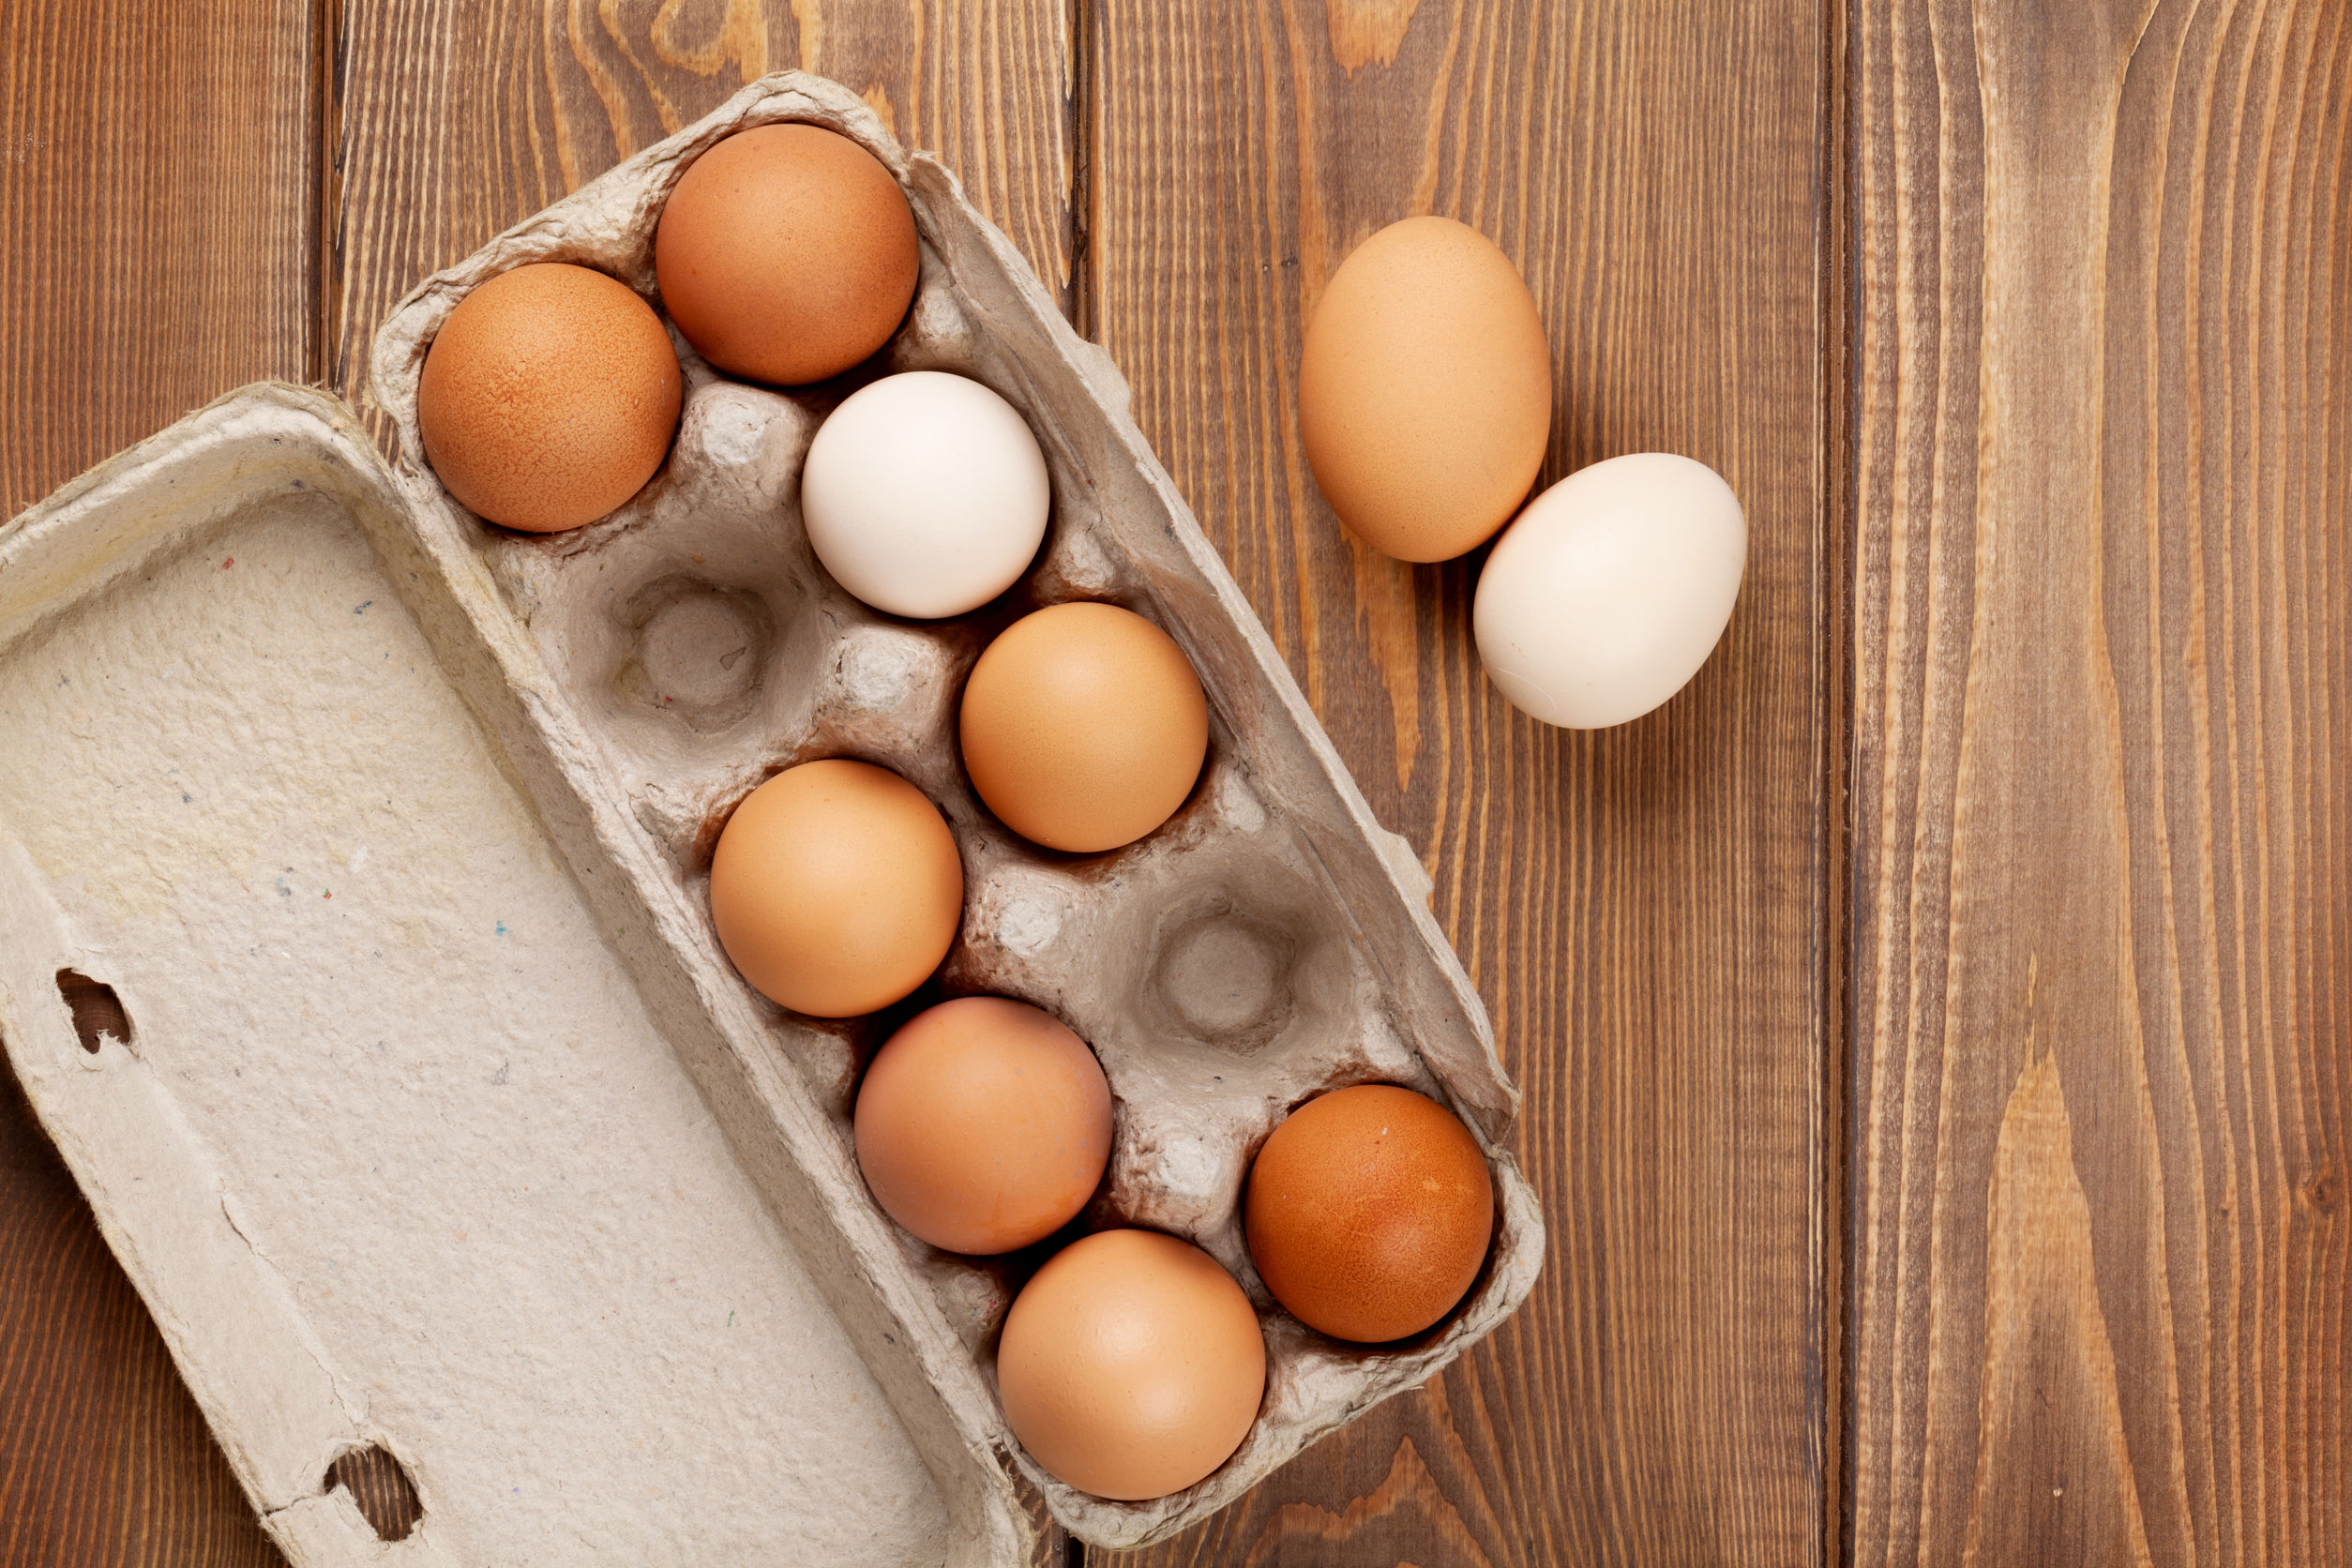 Should you store your eggs in the fridge or pantry? - NZ Herald